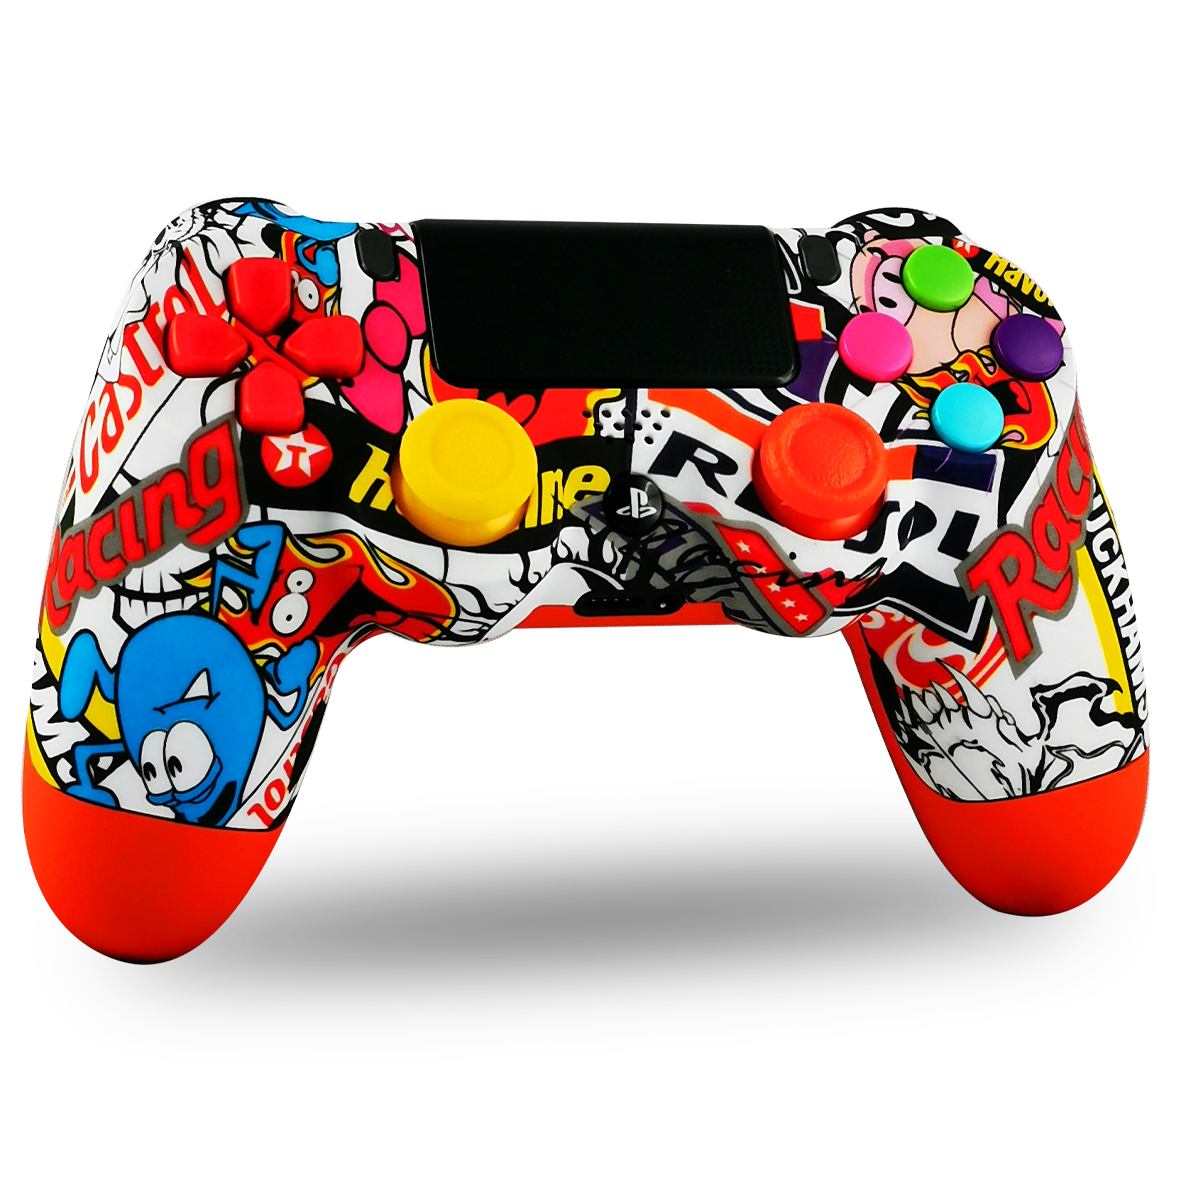 manette-PS4-custom-playstation-4-sony-personnalisee-drawmypad-inconnu15